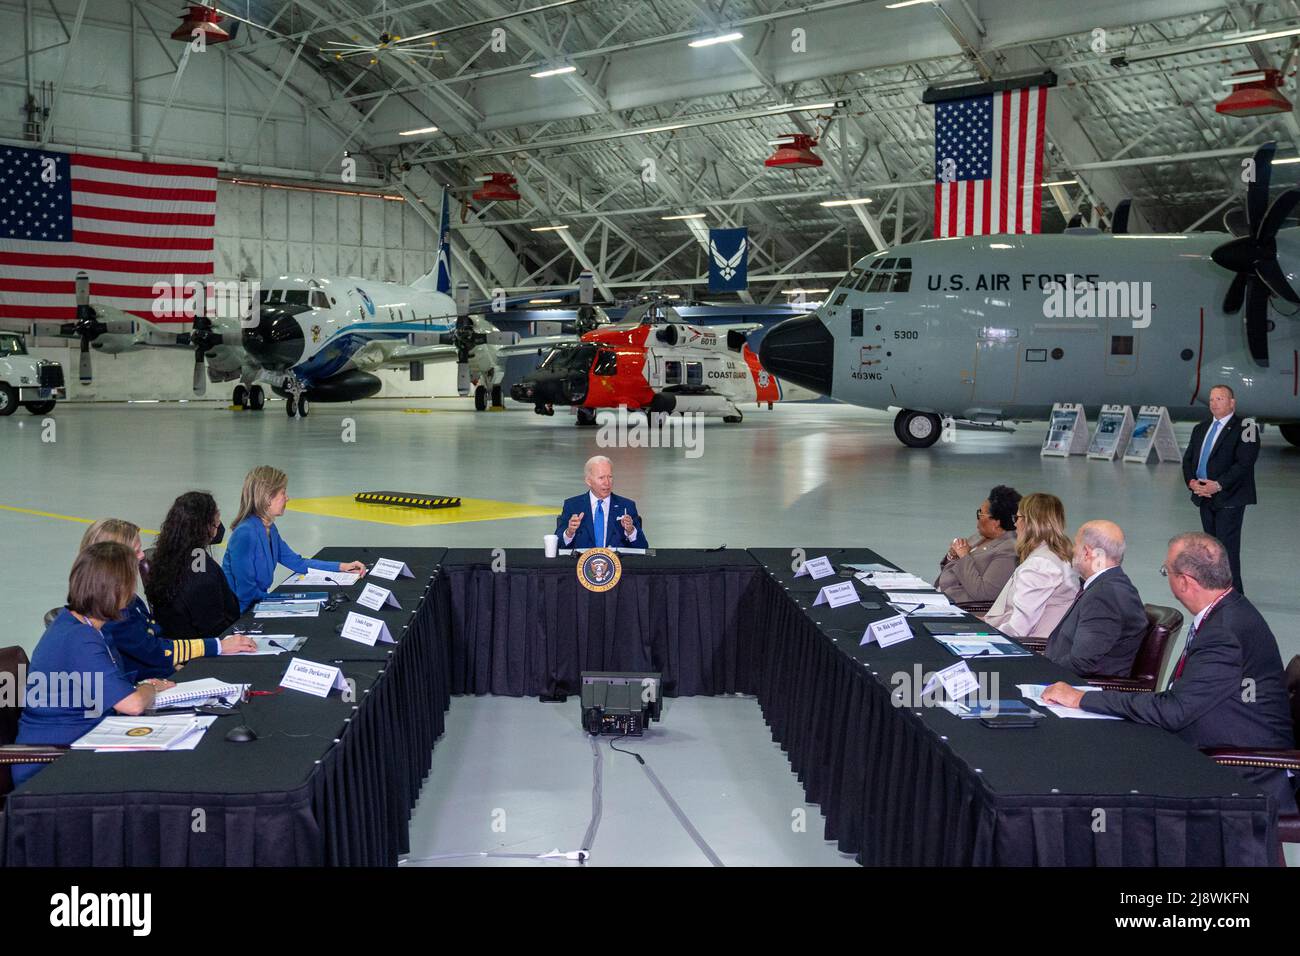 US President Joe Biden delivers remarks prior to a briefing on interagency efforts to prepare for and respond to hurricanes this season at Joint Base Andrews in Maryland, USA 18 May 2022. Credit: Shawn Thew/Pool via CNP Stock Photo